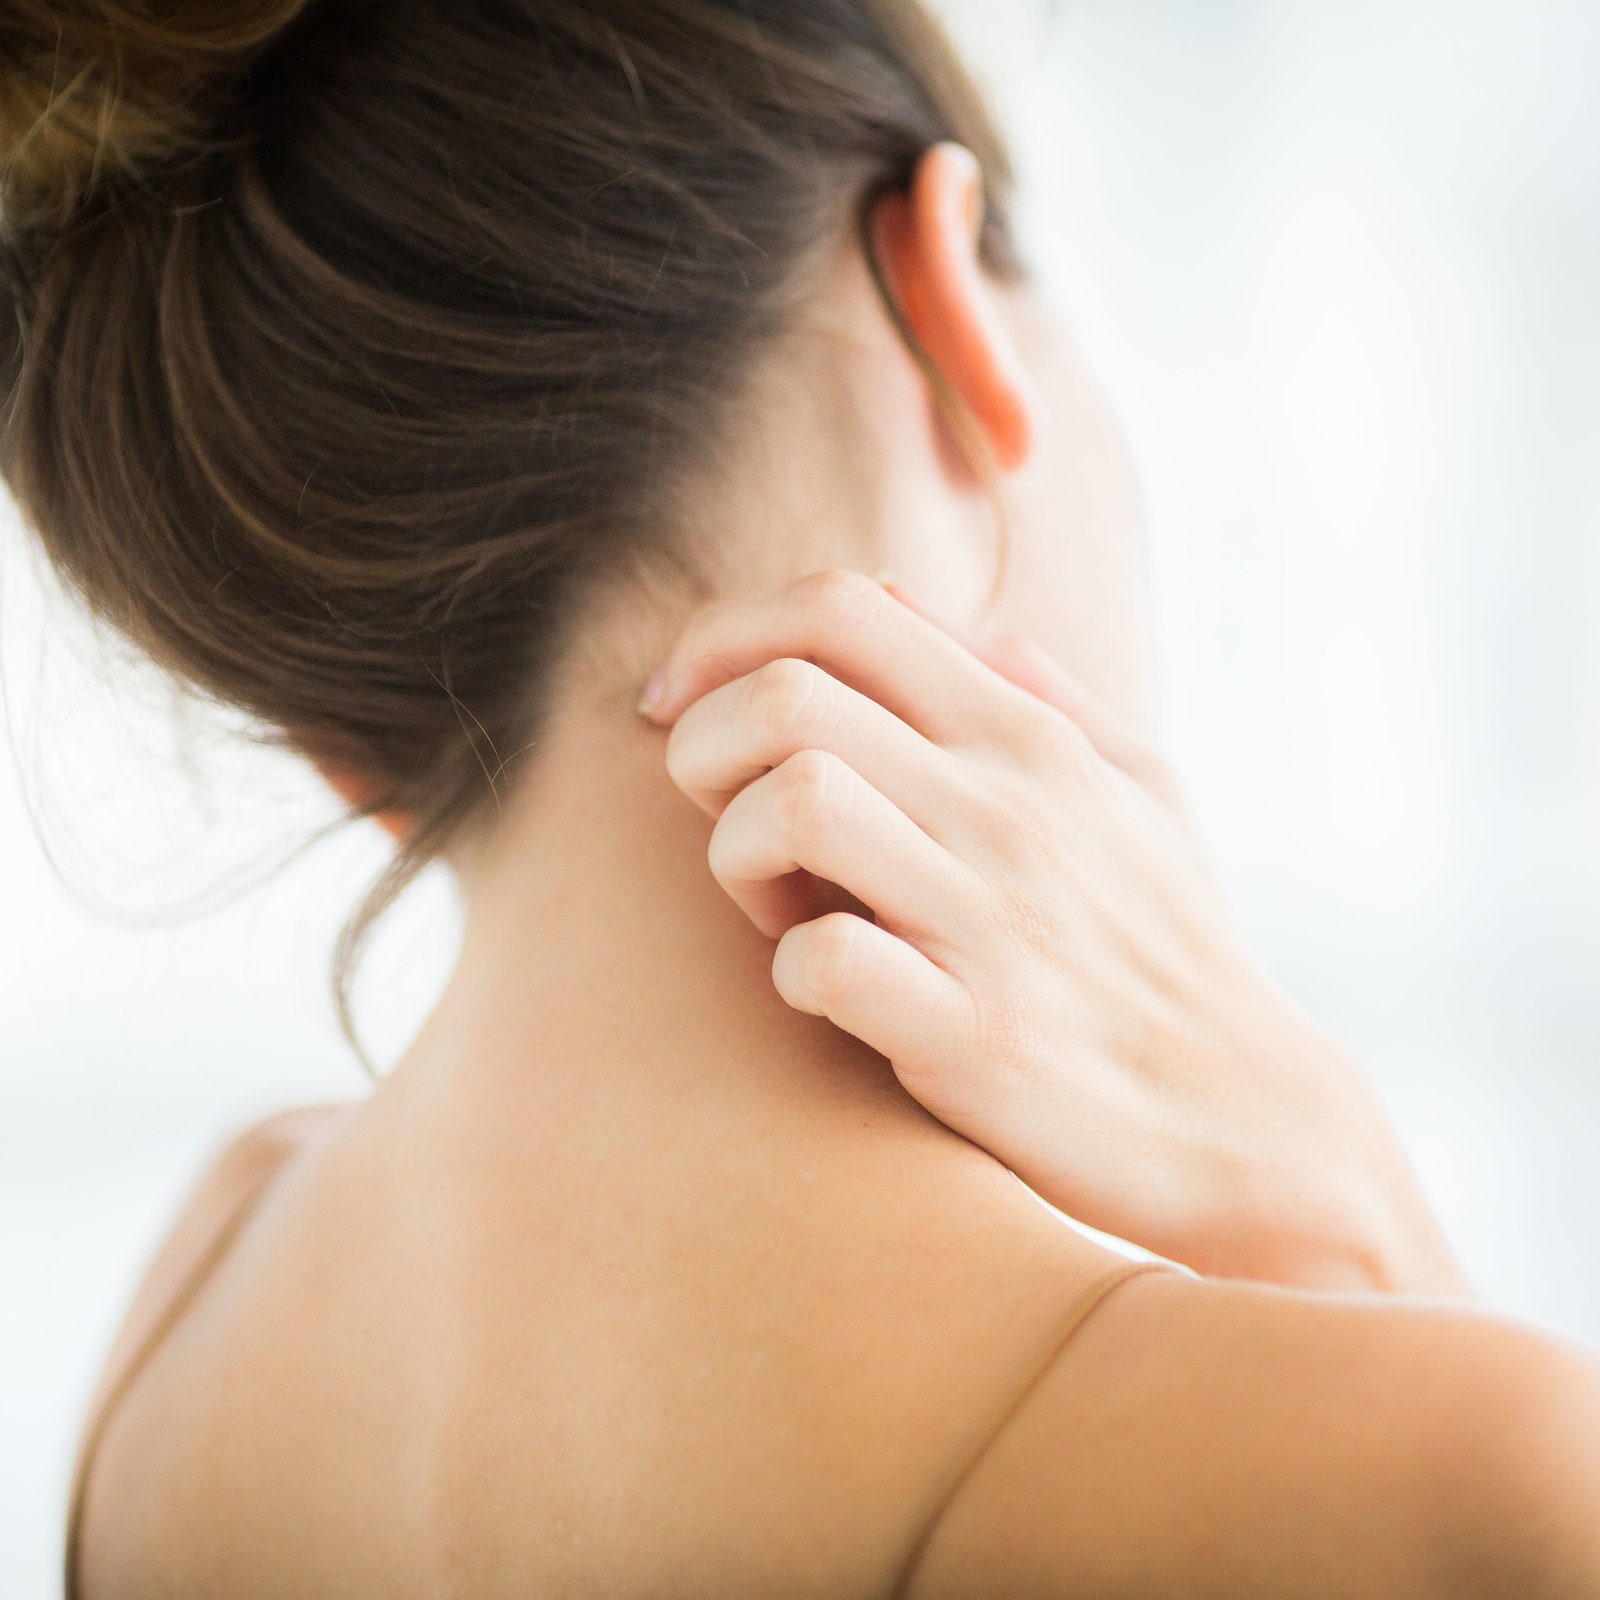 Woman scratching back of neck